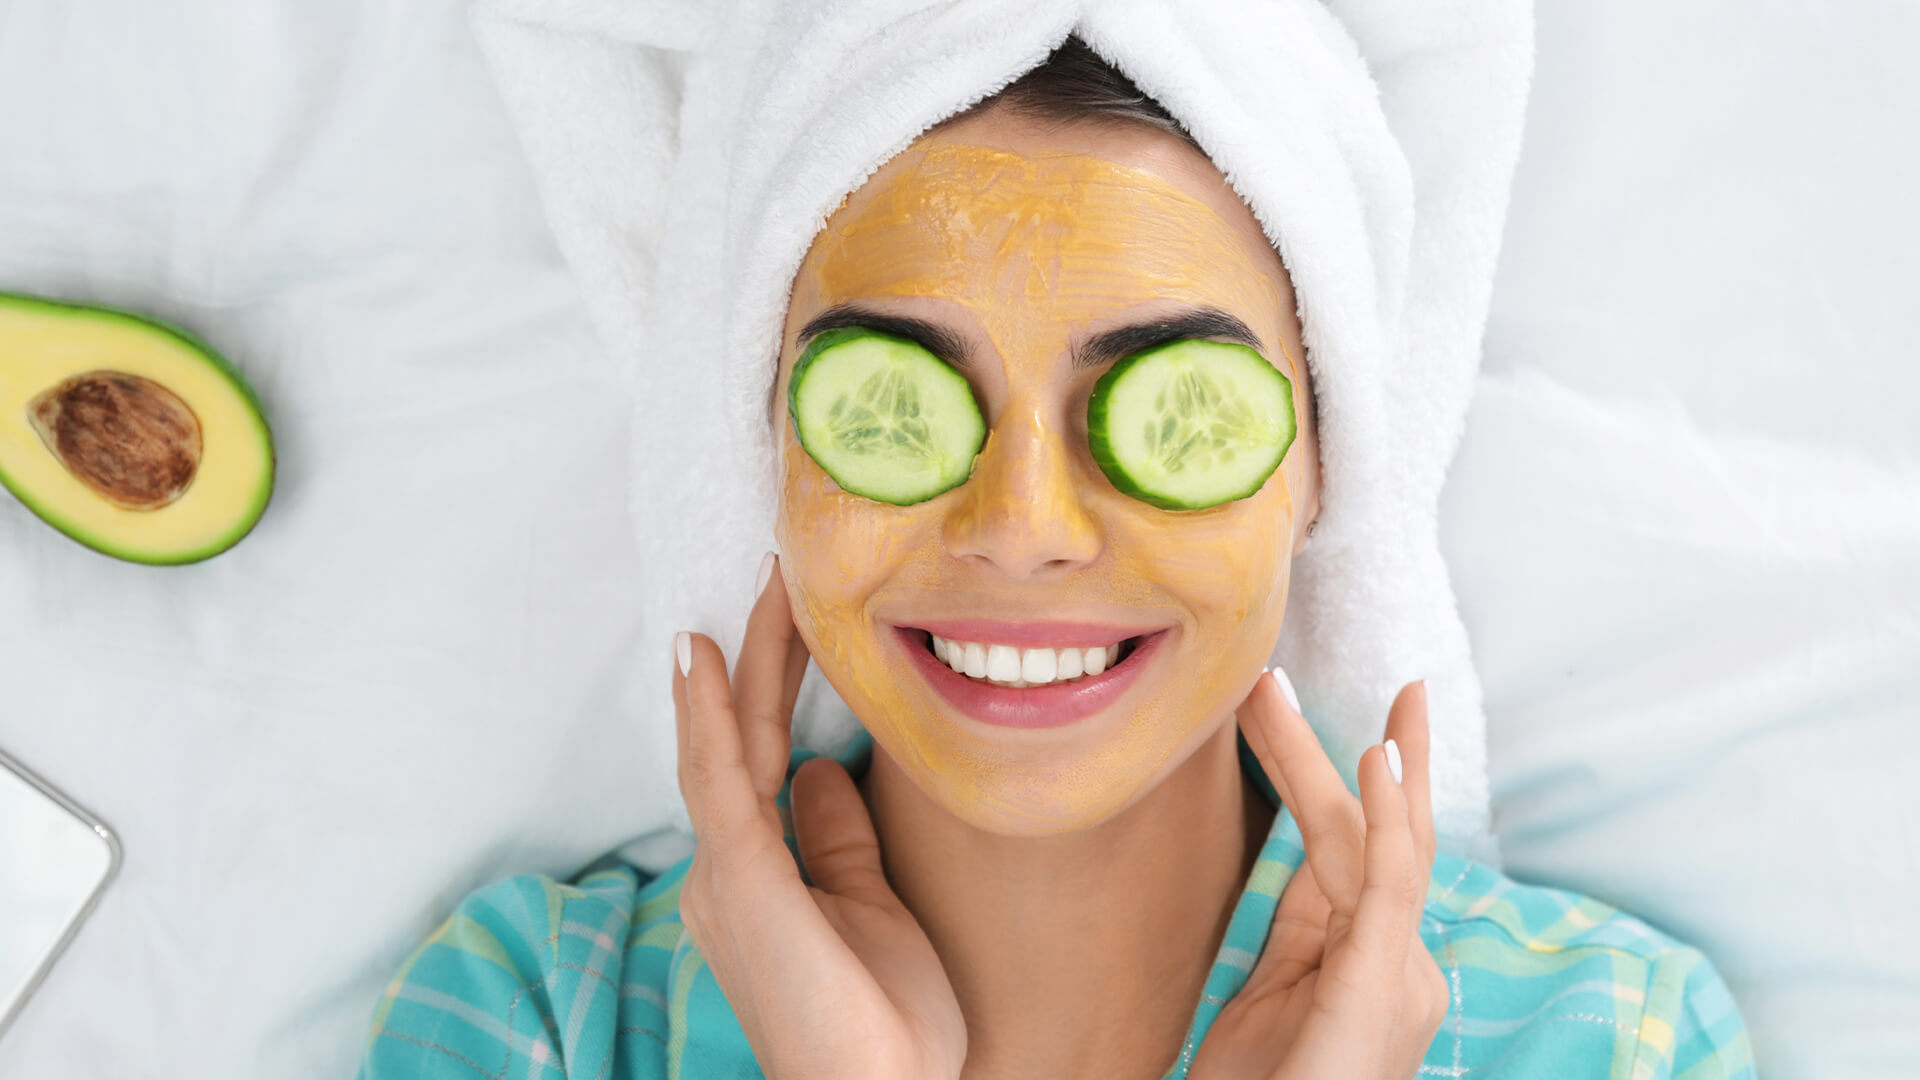 Woman with a facemask on, cucumbers on her eyes, and her hair wrapped in a towel